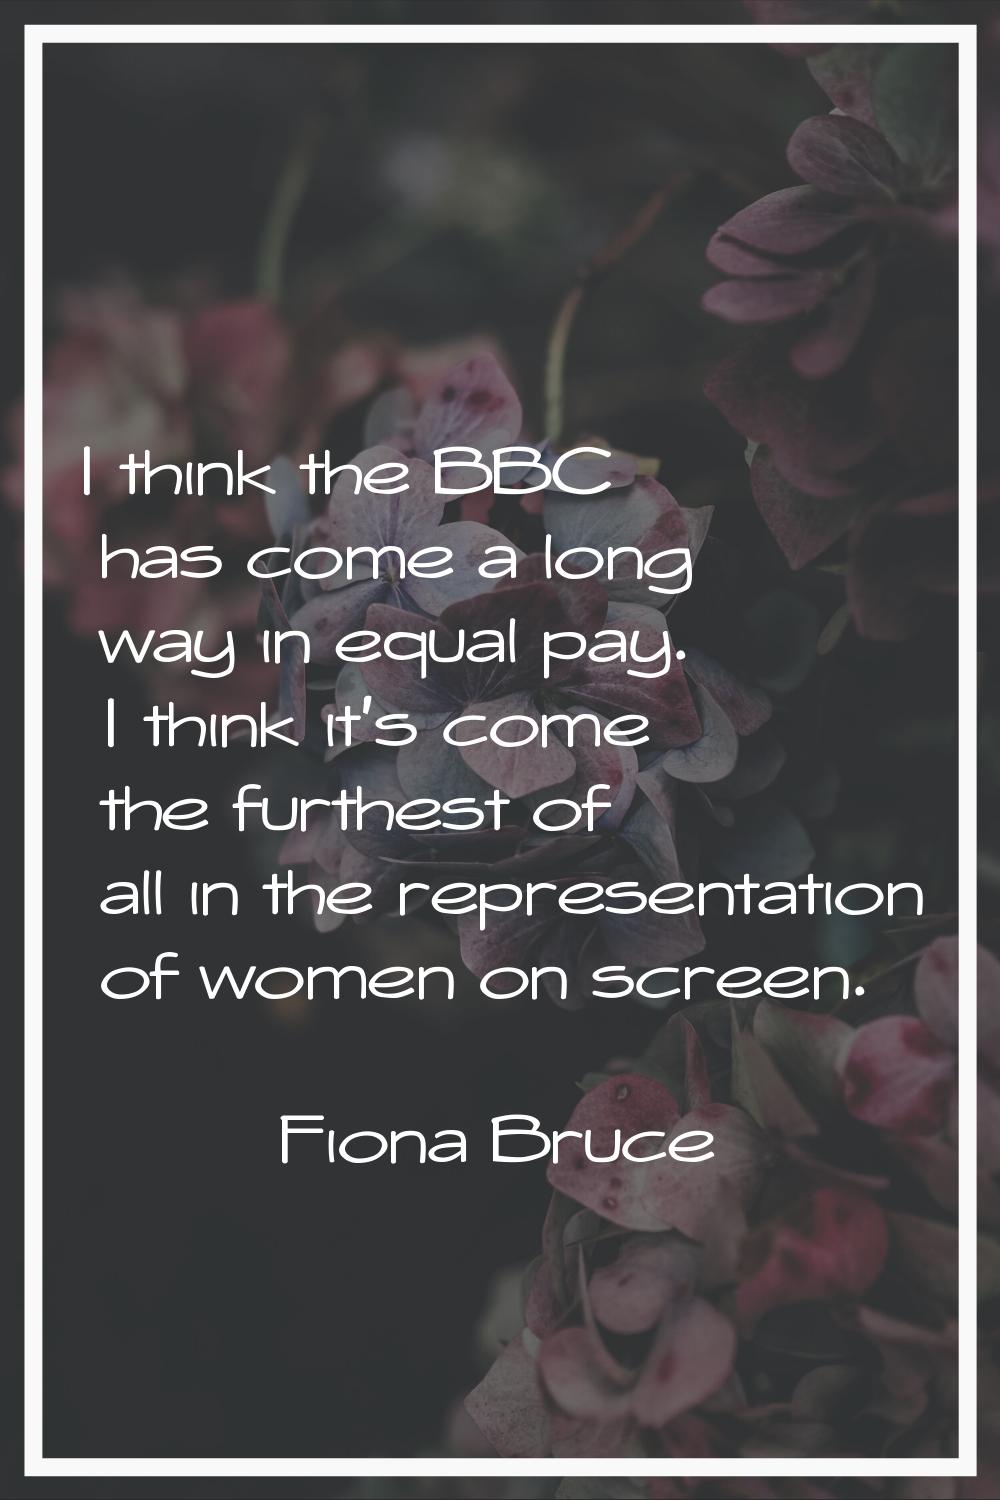 I think the BBC has come a long way in equal pay. I think it's come the furthest of all in the repr